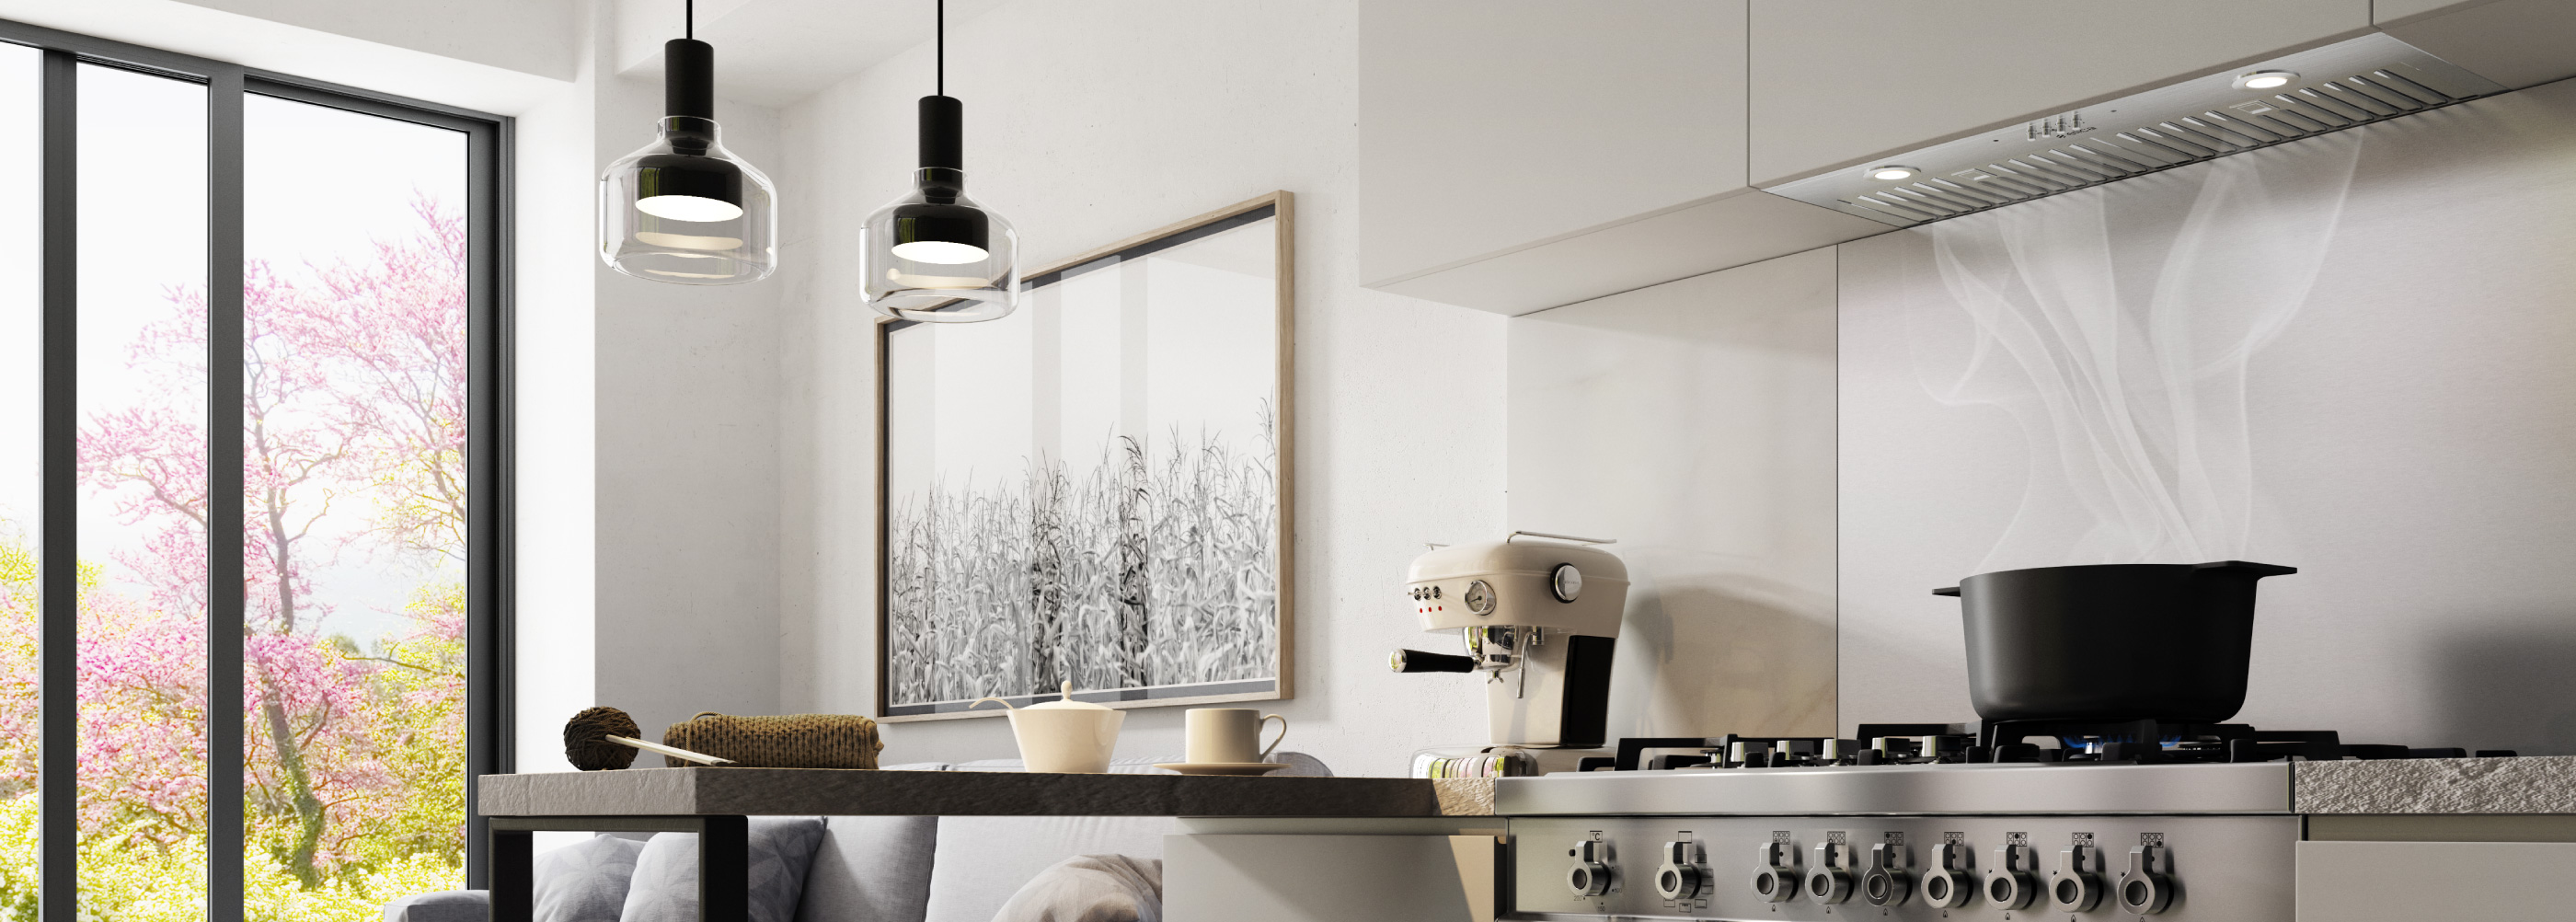 Transform your kitchen with the italian design and high performance from Techne line